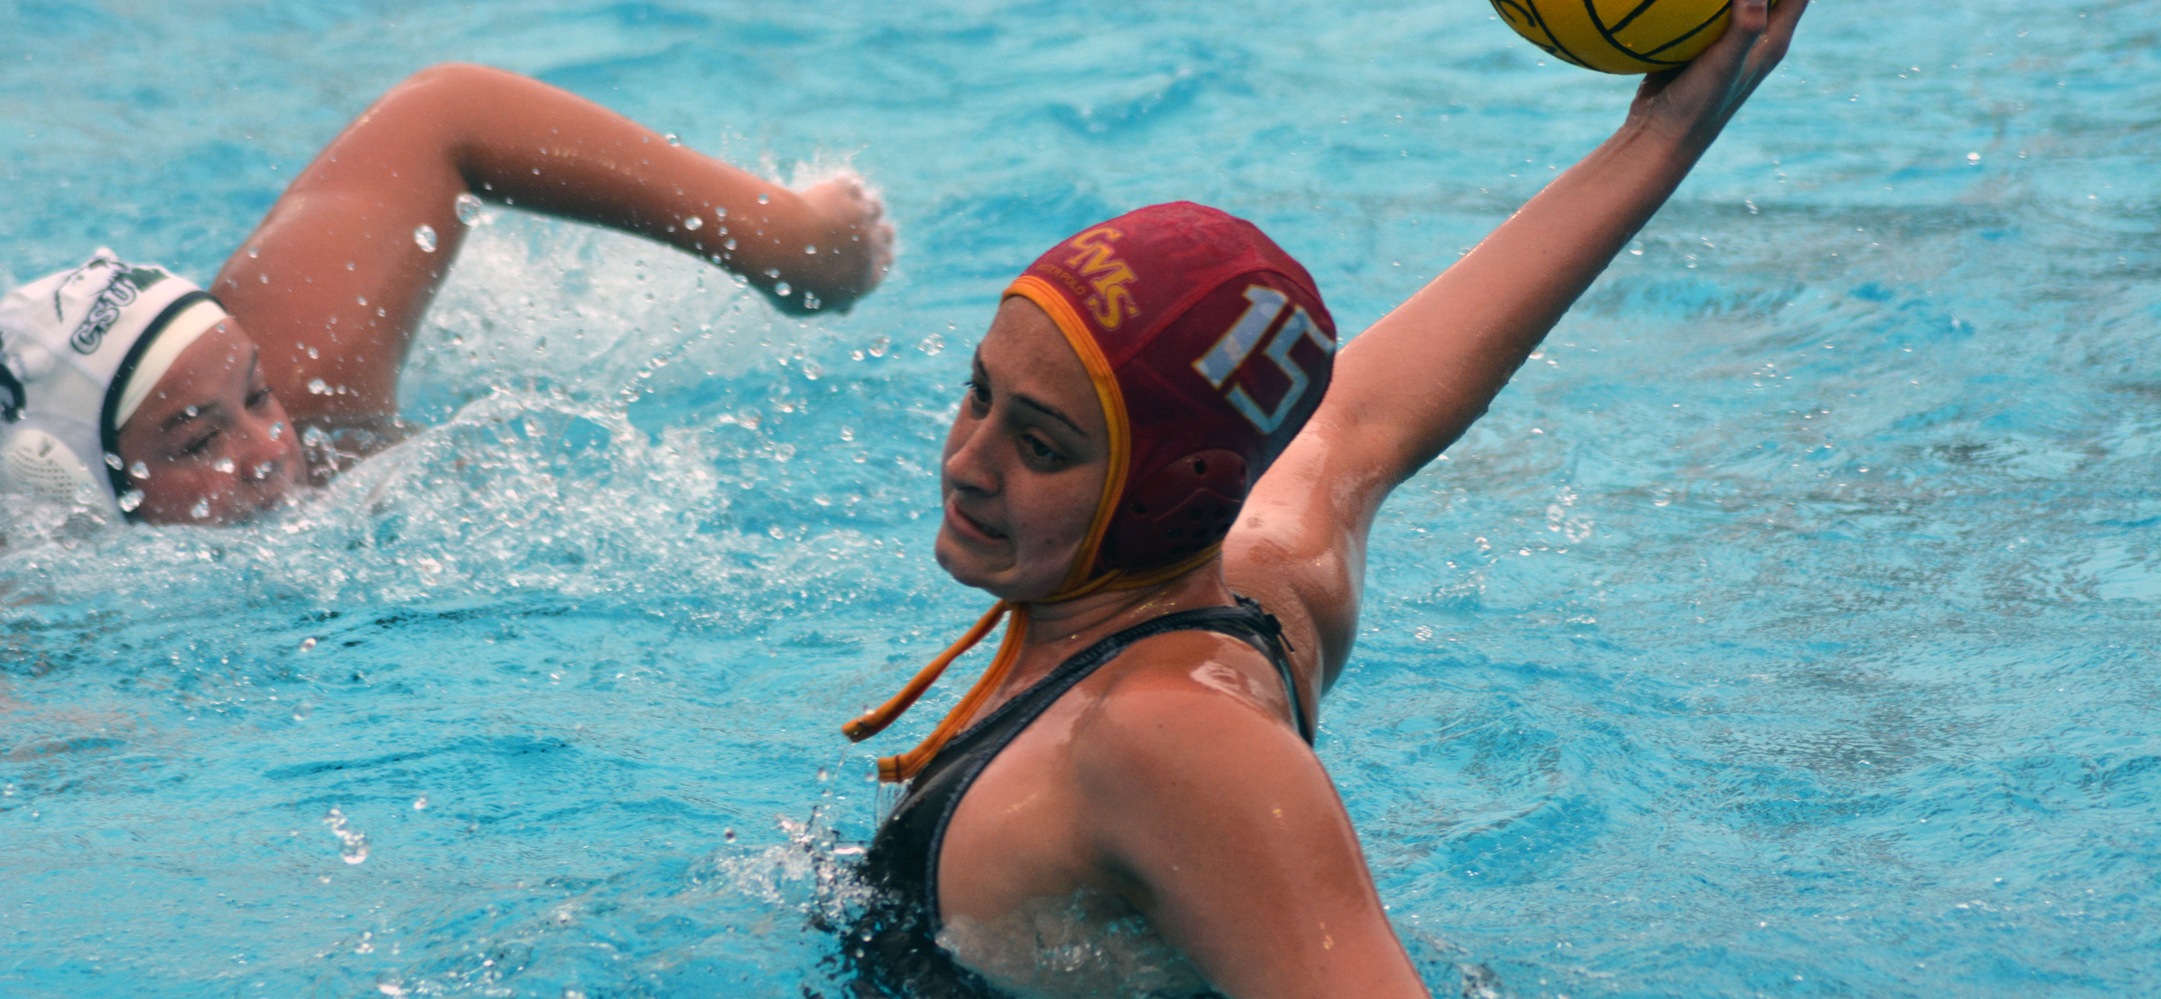 Amelia Ayala had a huge day with five goals in a 10-9 comeback win over Chapman